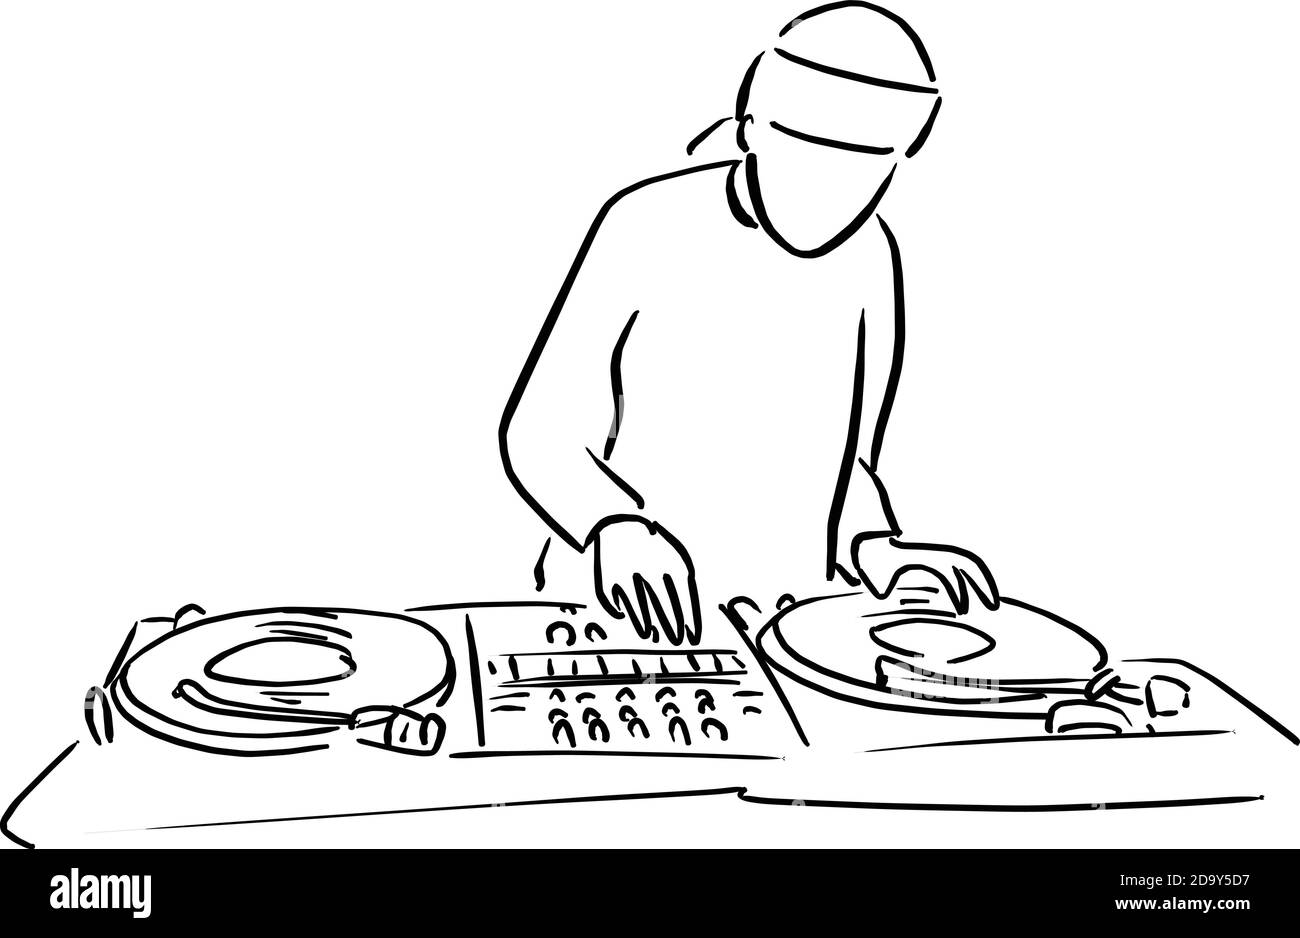 Disc jockey with the turntable dj plays scratching vinyl records and mix music tracks vector illustration sketch doodle hand drawn with black lines is Stock Vector